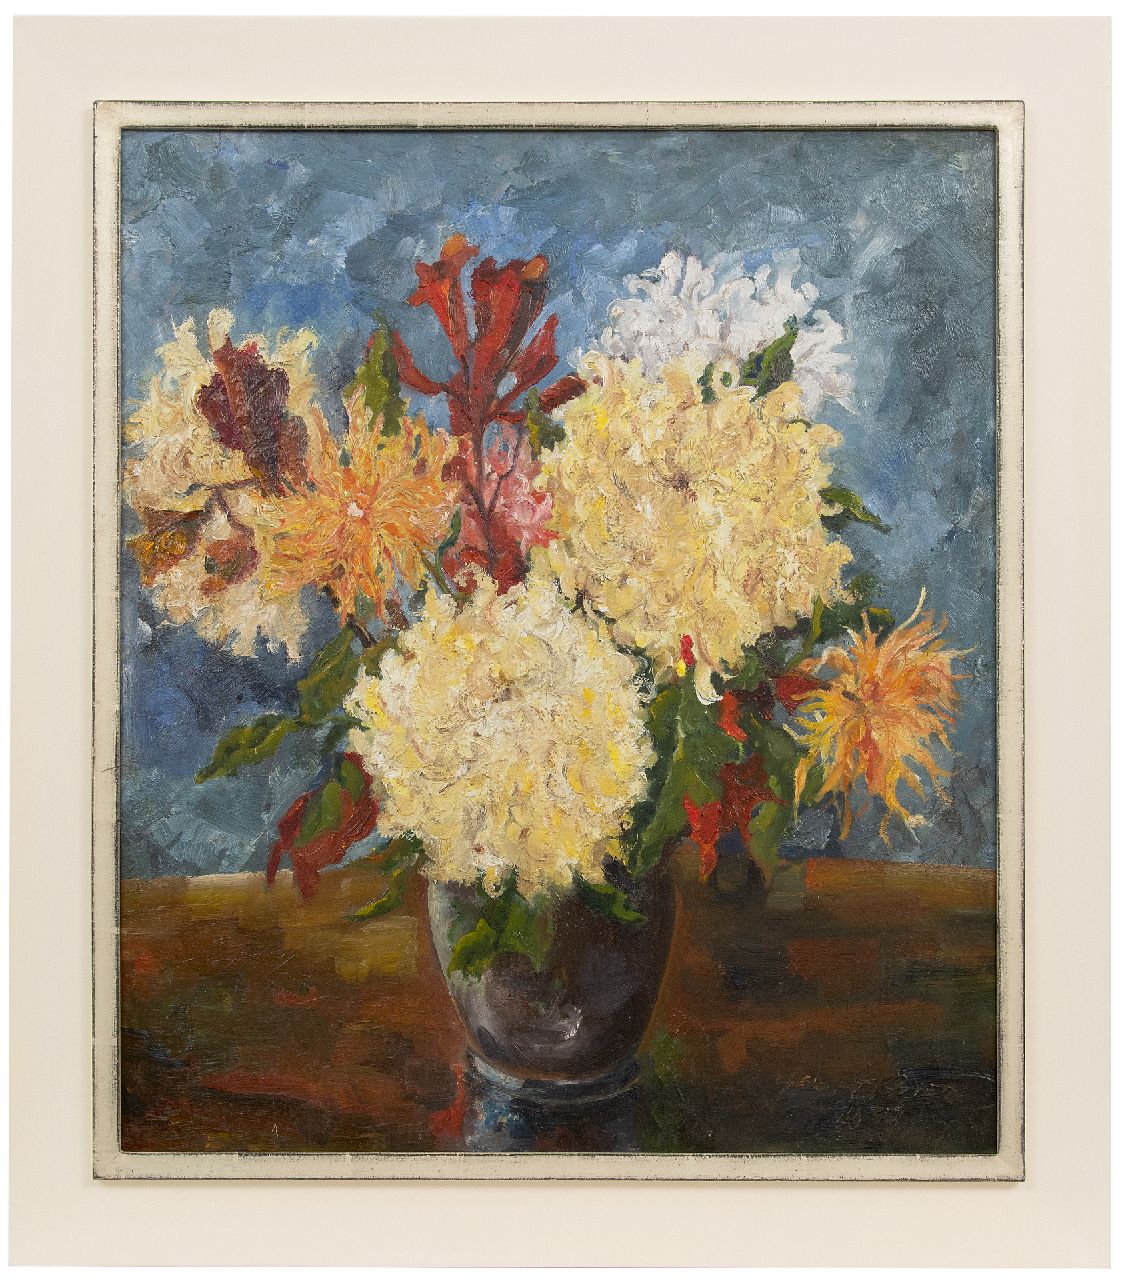 Lataster G.  | Gerard 'Ger' Lataster | Paintings offered for sale | Flowerstillife, oil on board 70.4 x 59.9 cm, signed l.r. and dated 1937